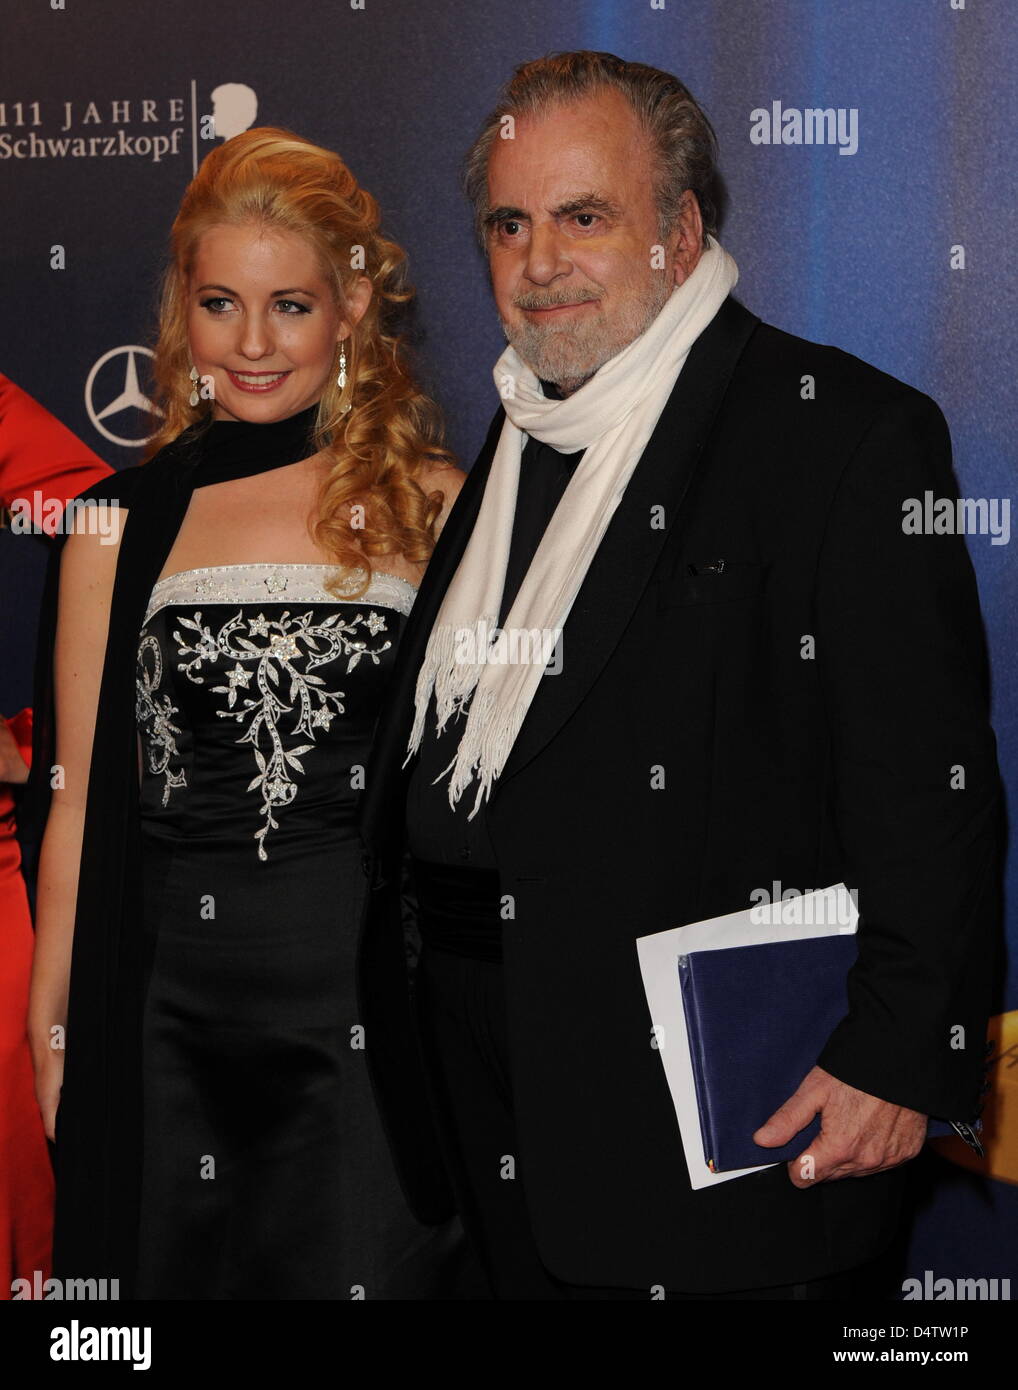 German screen legend Maximilian Schell (R) arrives with his girlfriend Iva Mihanovic for the Bambi 2009 award gala in Potsdam, Germany, 26 November 2009. The Bambi awards are annually awarded by Hubert Burda Media, this year?s Bambi is the 61st edition. It is the oldest and most important media award in Germany. Photo: Jens Kalaene Stock Photo